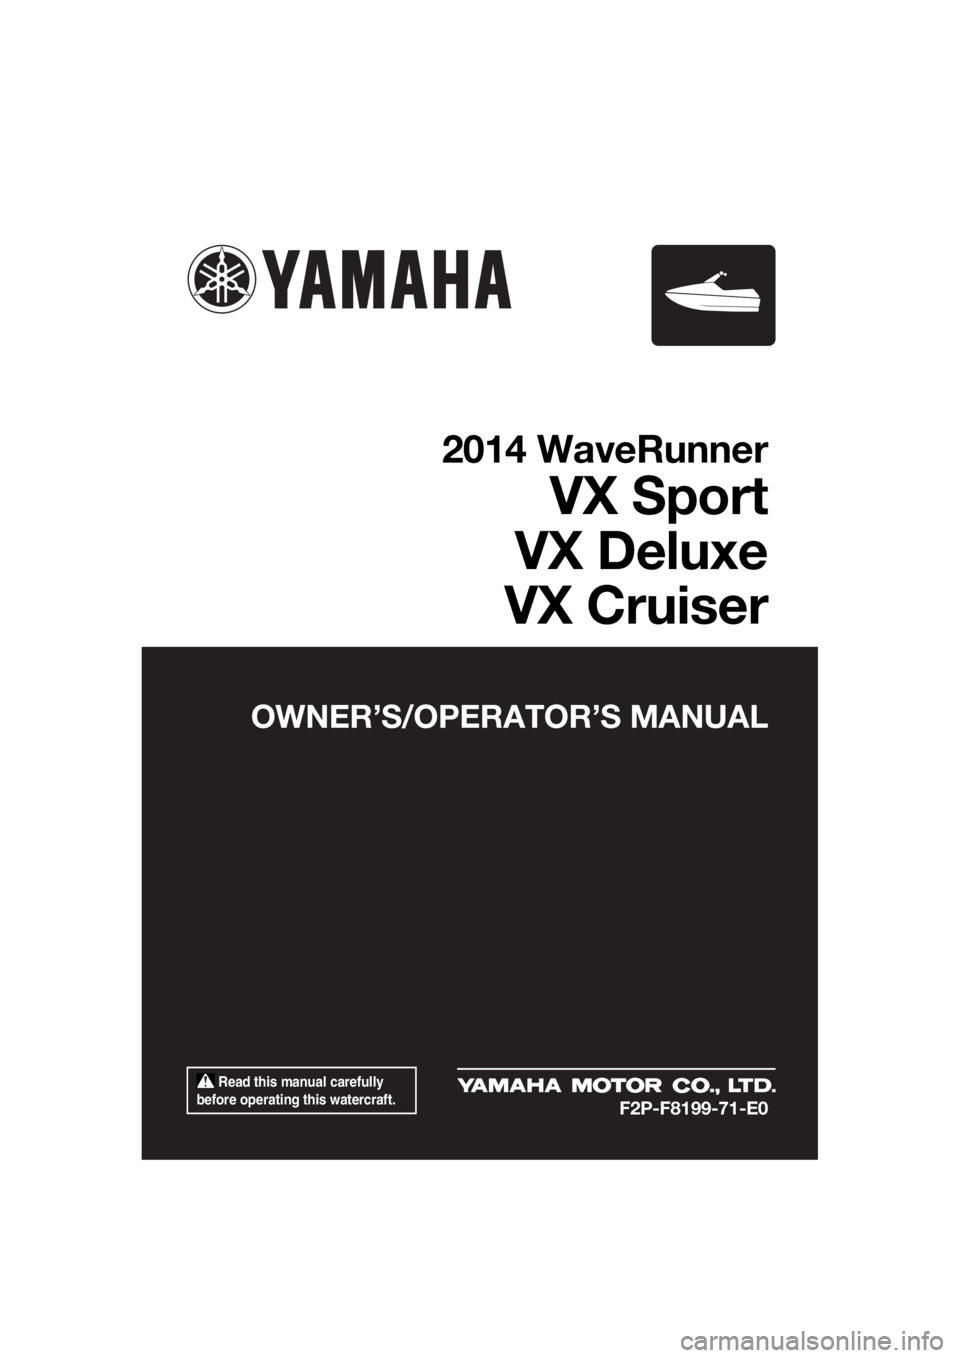 YAMAHA VX 2014  Owners Manual  Read this manual carefully 
before operating this watercraft.
OWNER’S/OPERATOR’S MANUAL
2014 WaveRunner
VX Sport
VX Deluxe
VX Cruiser
F2P-F8199-71-E0
UF2P71E0.book  Page 1  Wednesday, July 10, 20